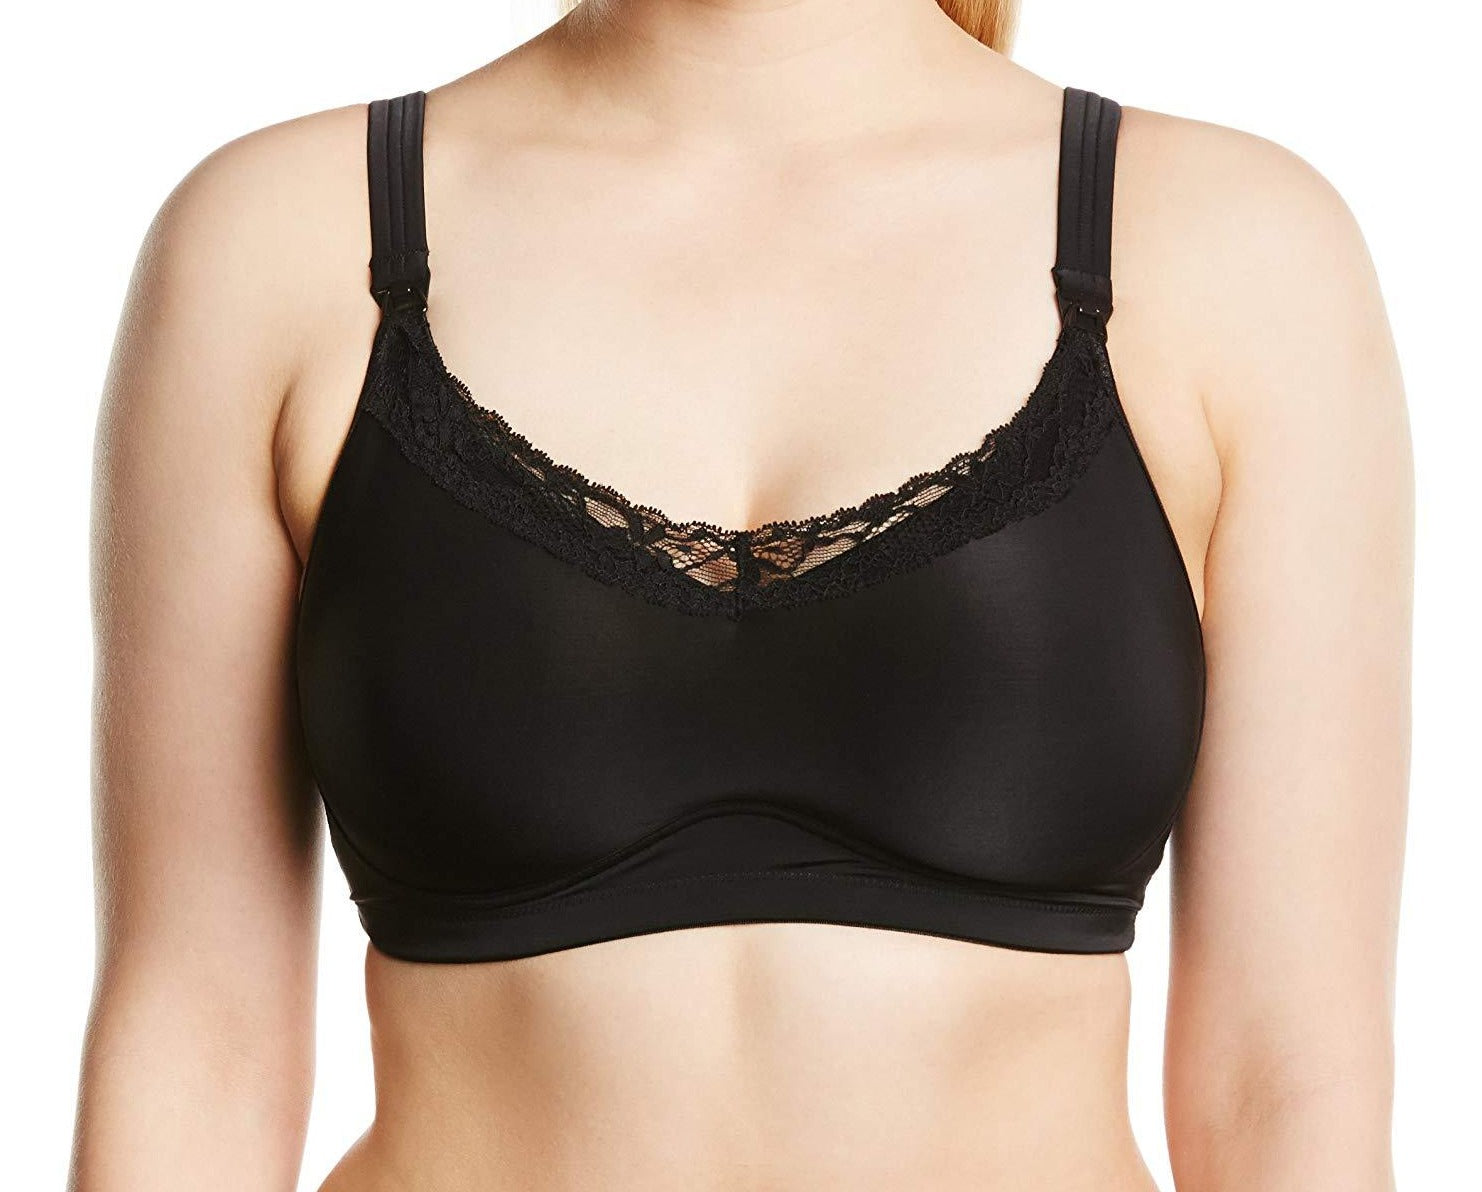 A softcup, drop cup, nursing bra from Heidi Klum. Great support and nursing convenience in the best color for a new mother, black! Style H71-135.